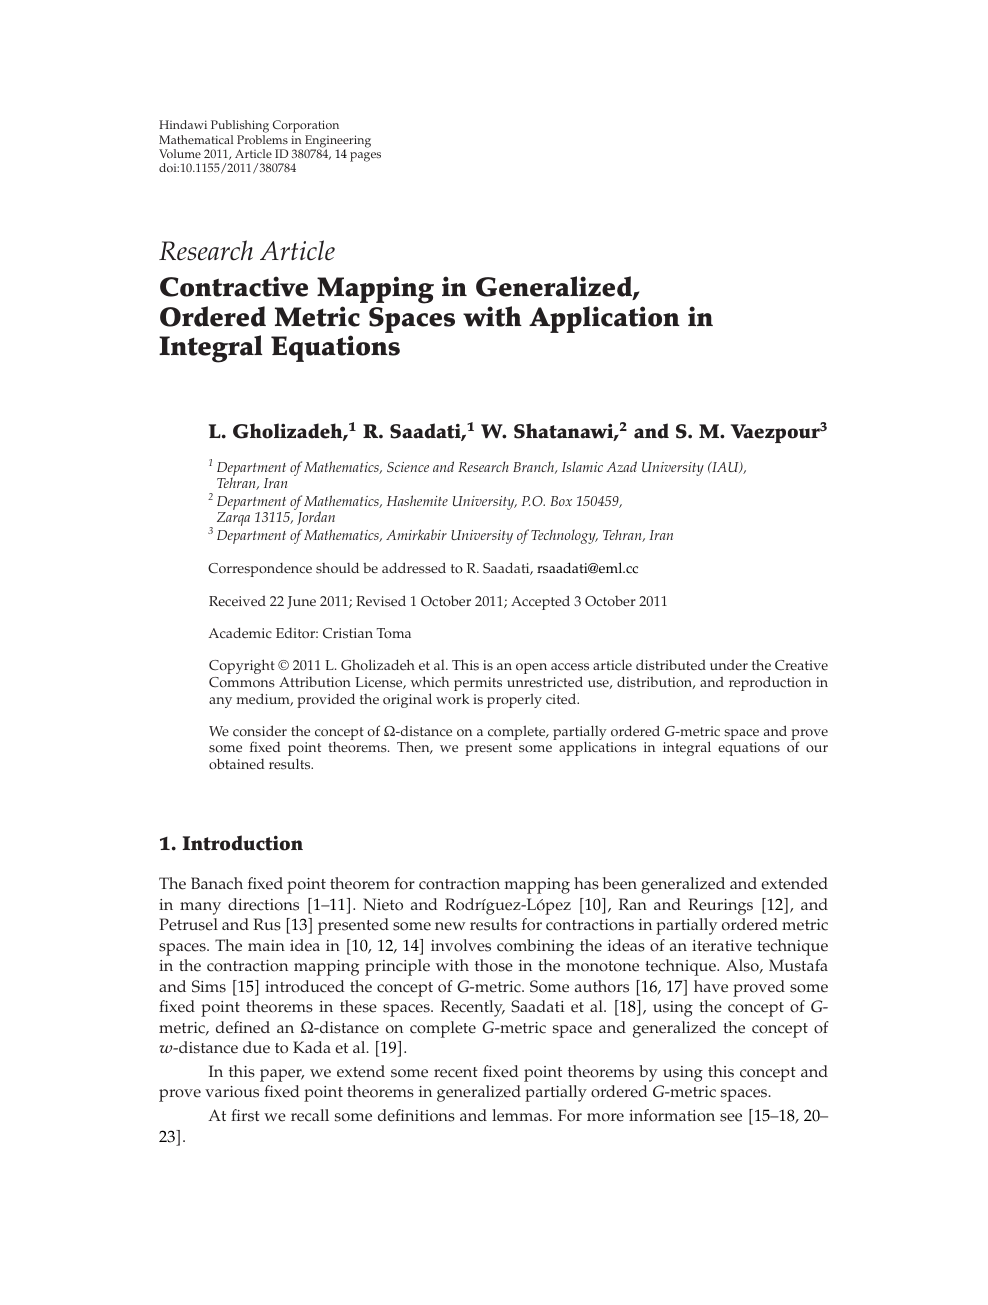 Contractive Mapping In Generalized Ordered Metric Spaces With Application In Integral Equations Topic Of Research Paper In Mathematics Download Scholarly Article Pdf And Read For Free On Cyberleninka Open Science Hub